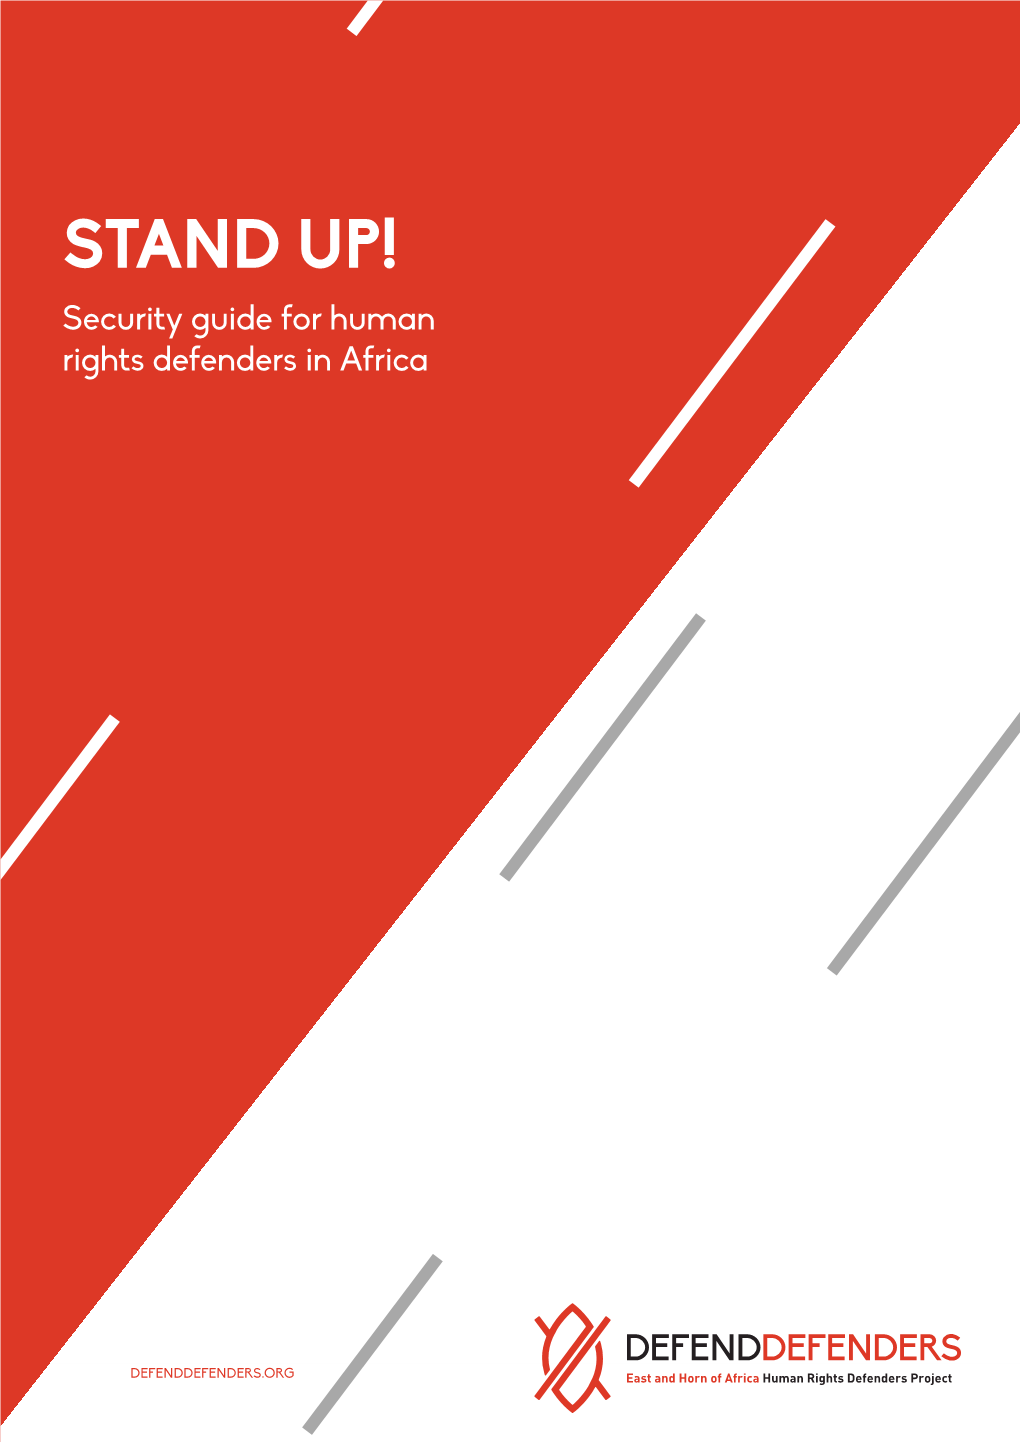 STAND UP! Security Guide for Human Rights Defenders in Africa